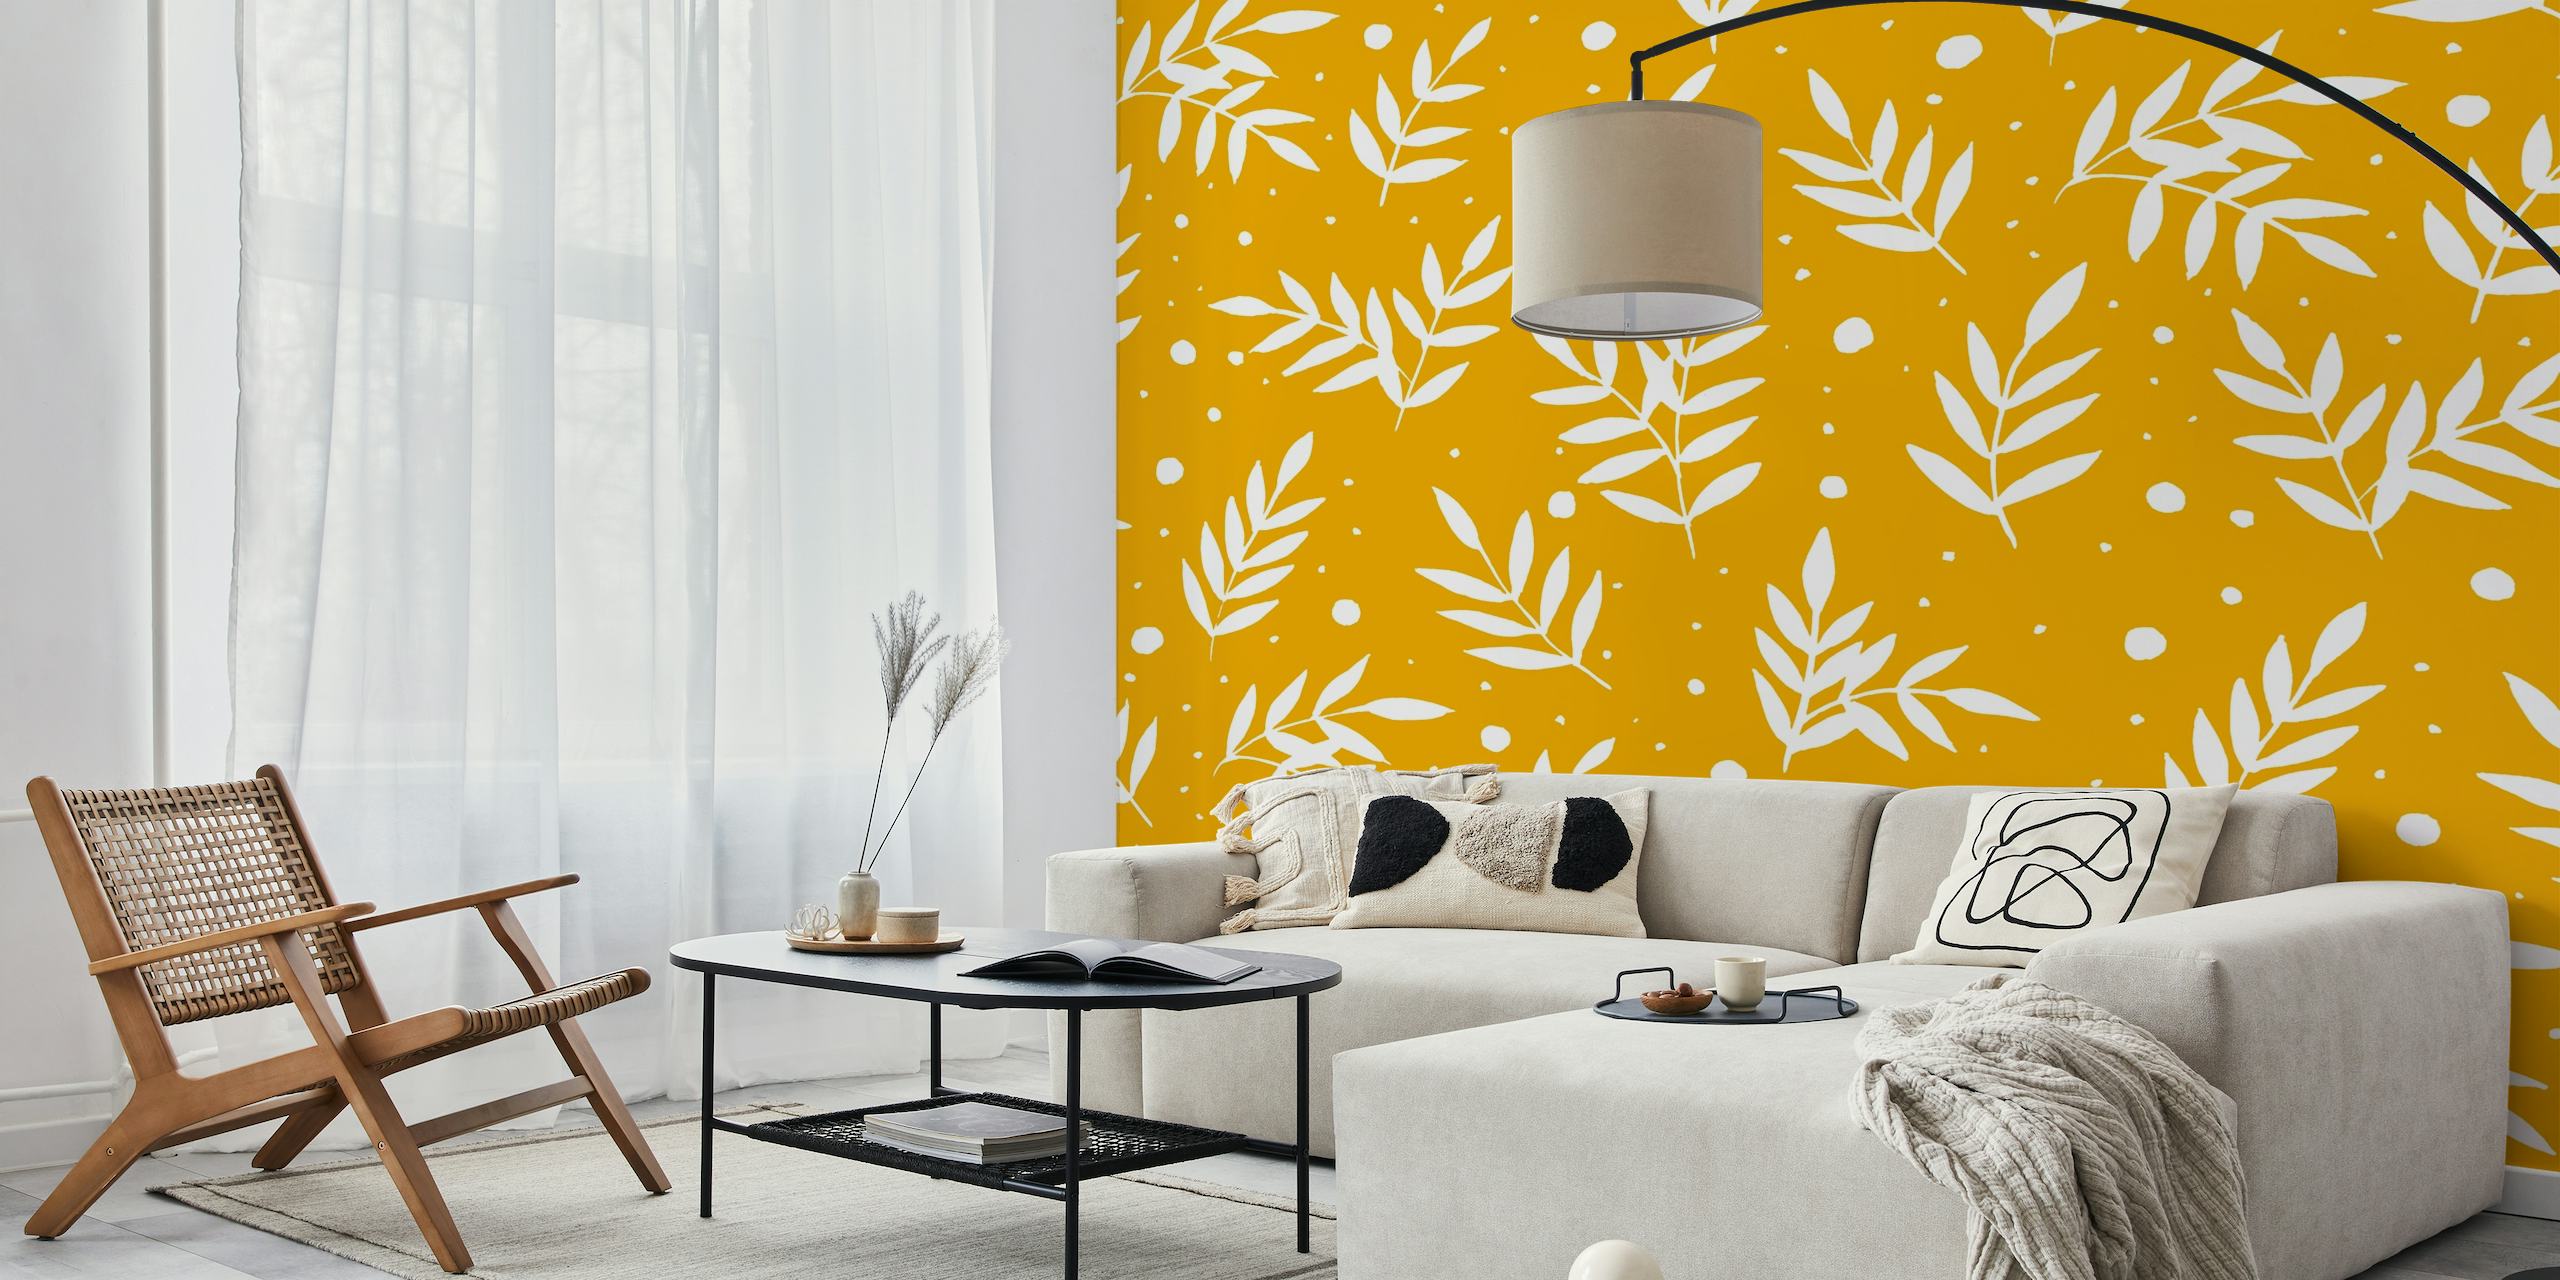 Mustard-yellow wall mural with white branch patterns from Happywall titled 'Magical Branches'.